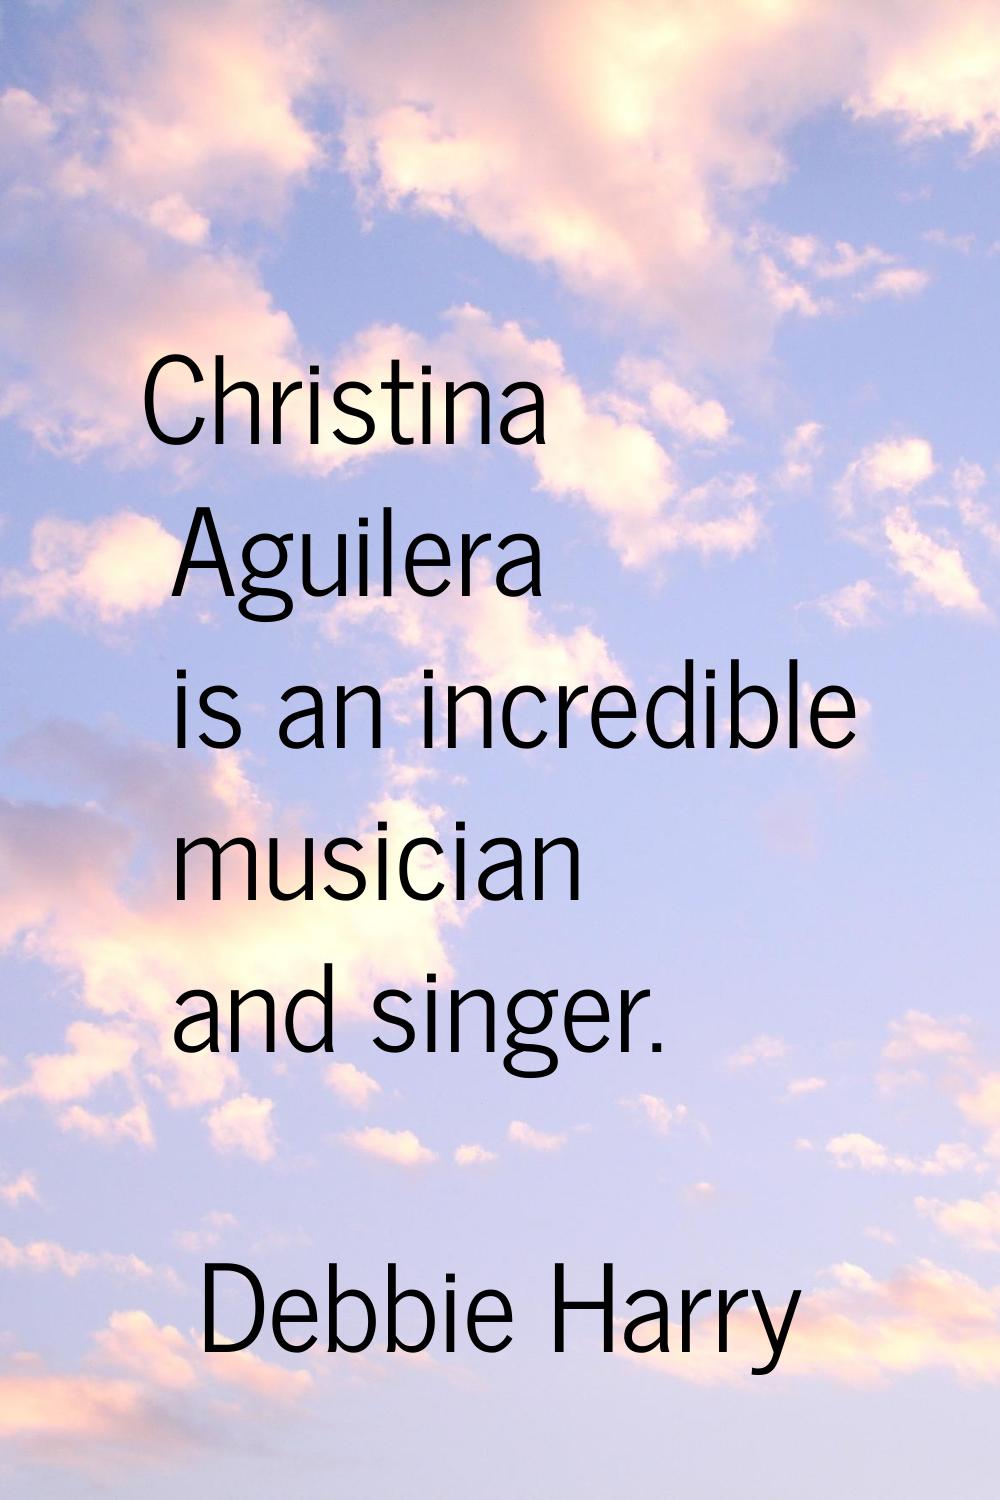 Christina Aguilera is an incredible musician and singer.